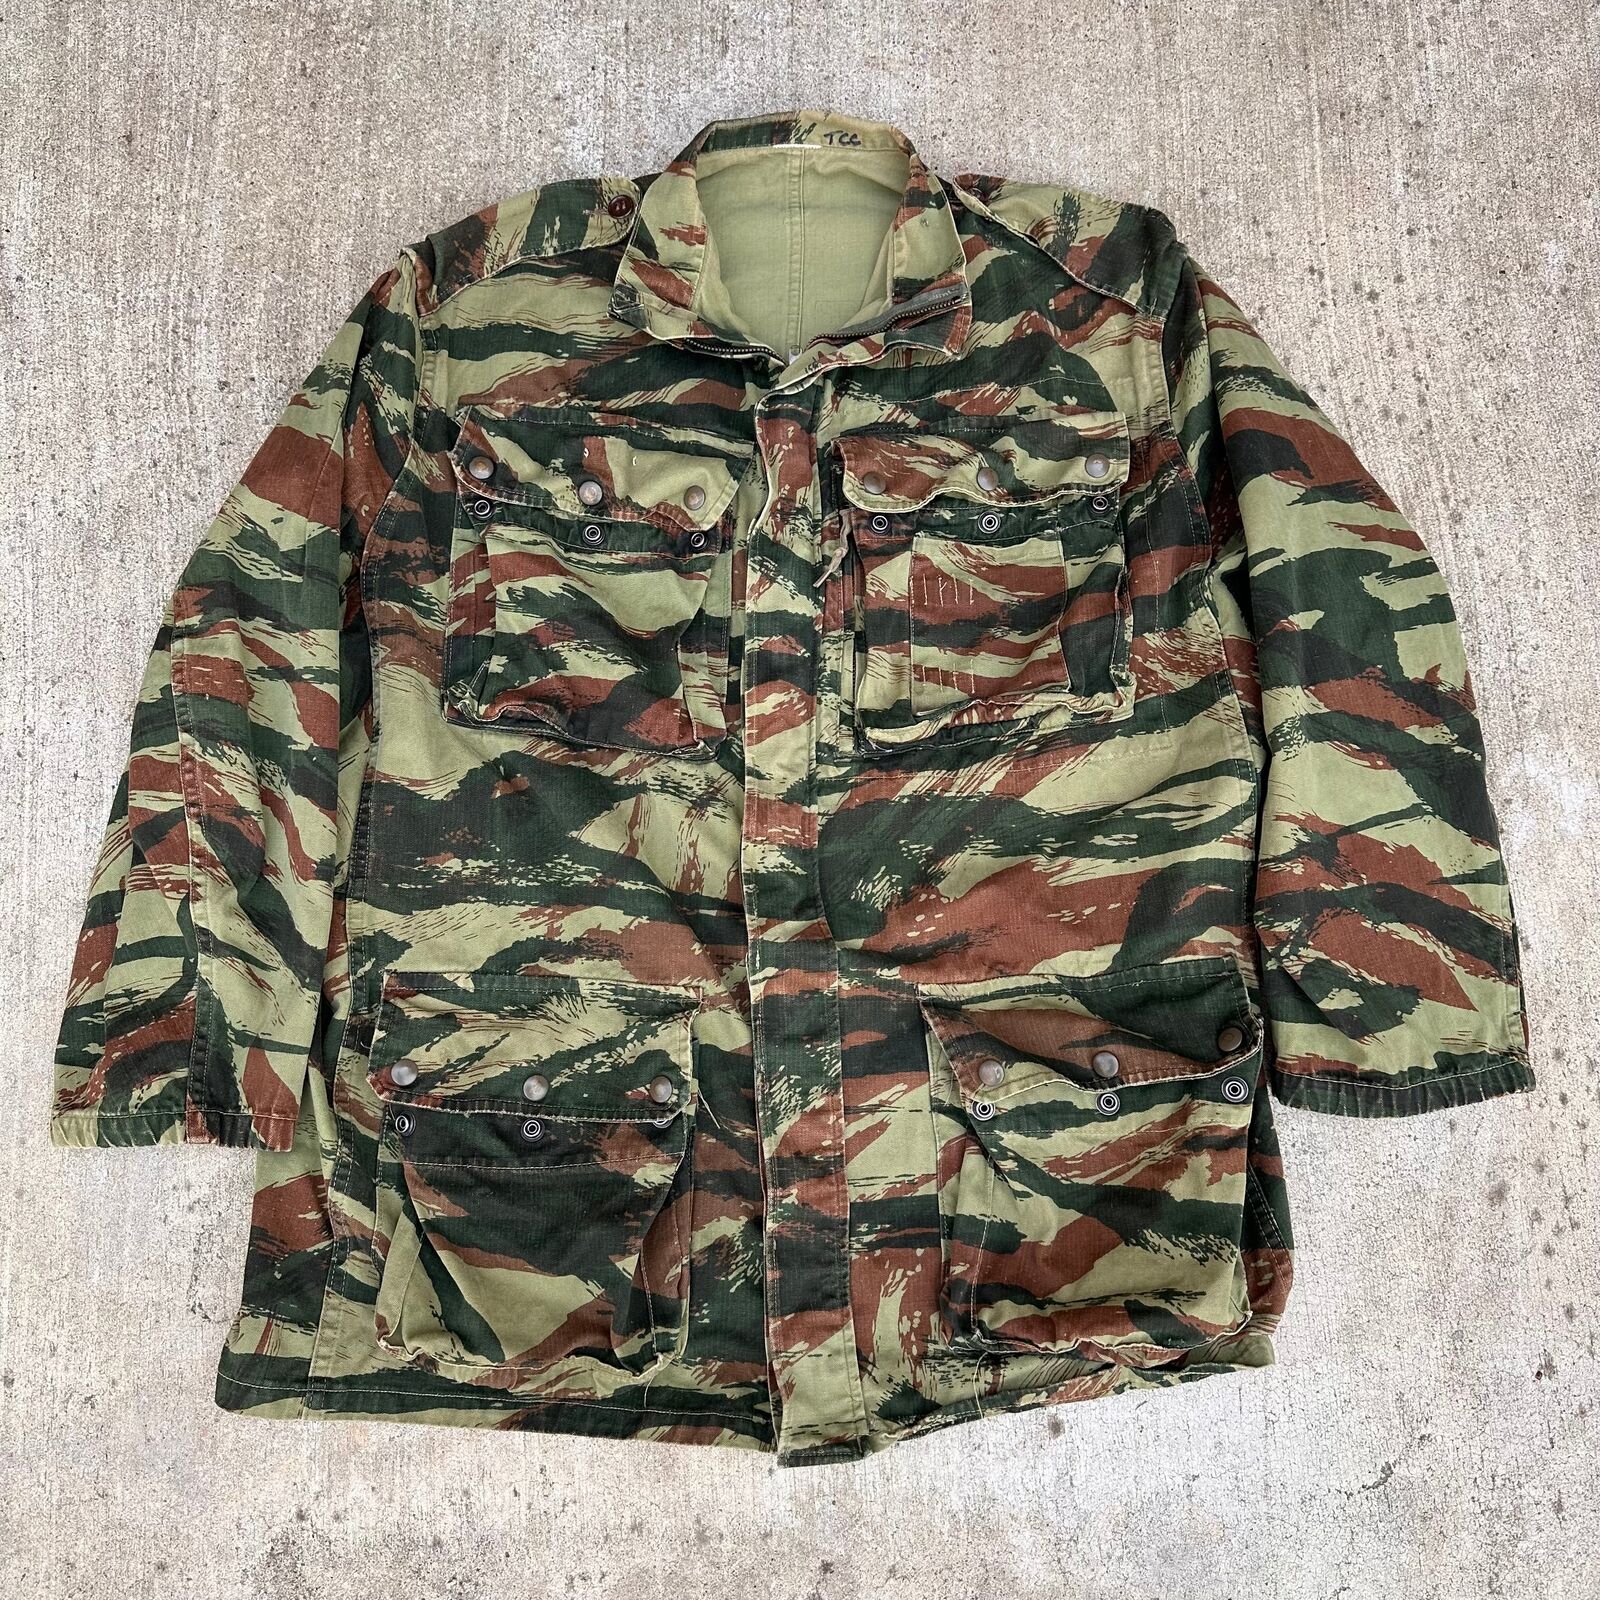 Vintage 1950’s French TAP 47/56 Lizard Camo Paratrooper Smock